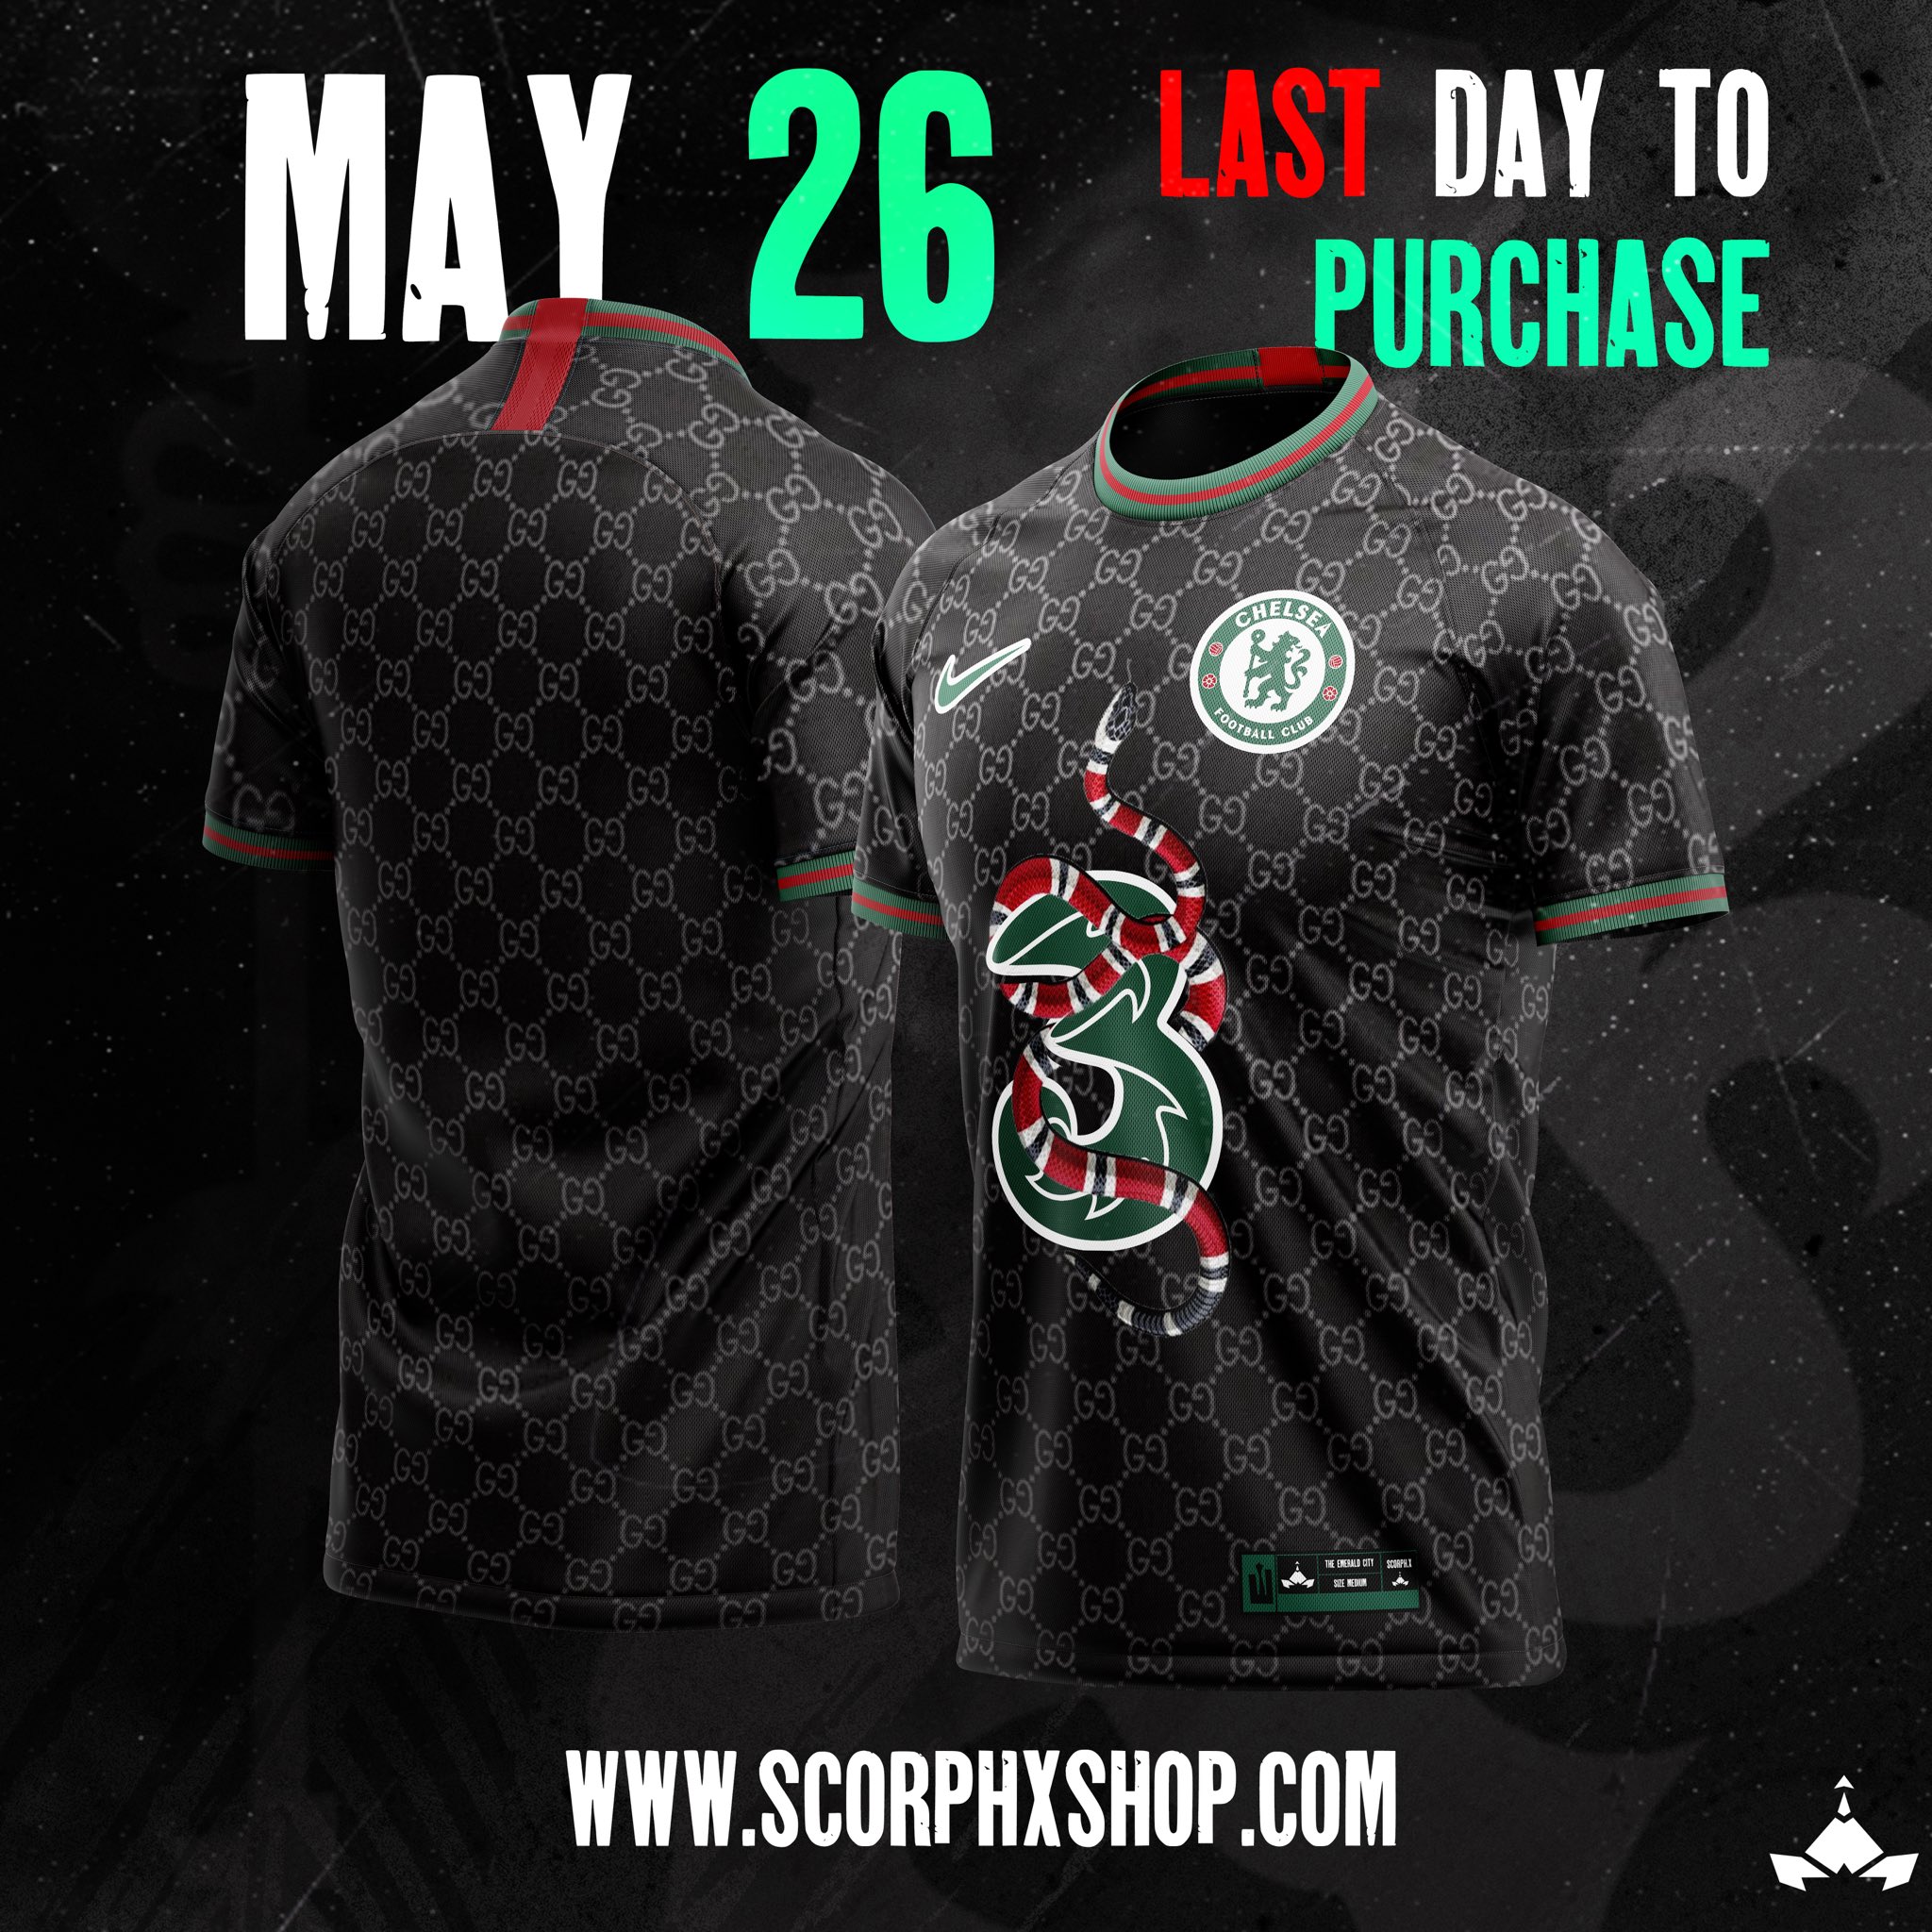 Scorphx  The Footy Kit Designer 👕⚽️ on X: 🚨SALE ALERT 🚨 I'm selling  this Chelsea x Gucci jersey for a LIMITED TIME until May 26. This would  make a great present